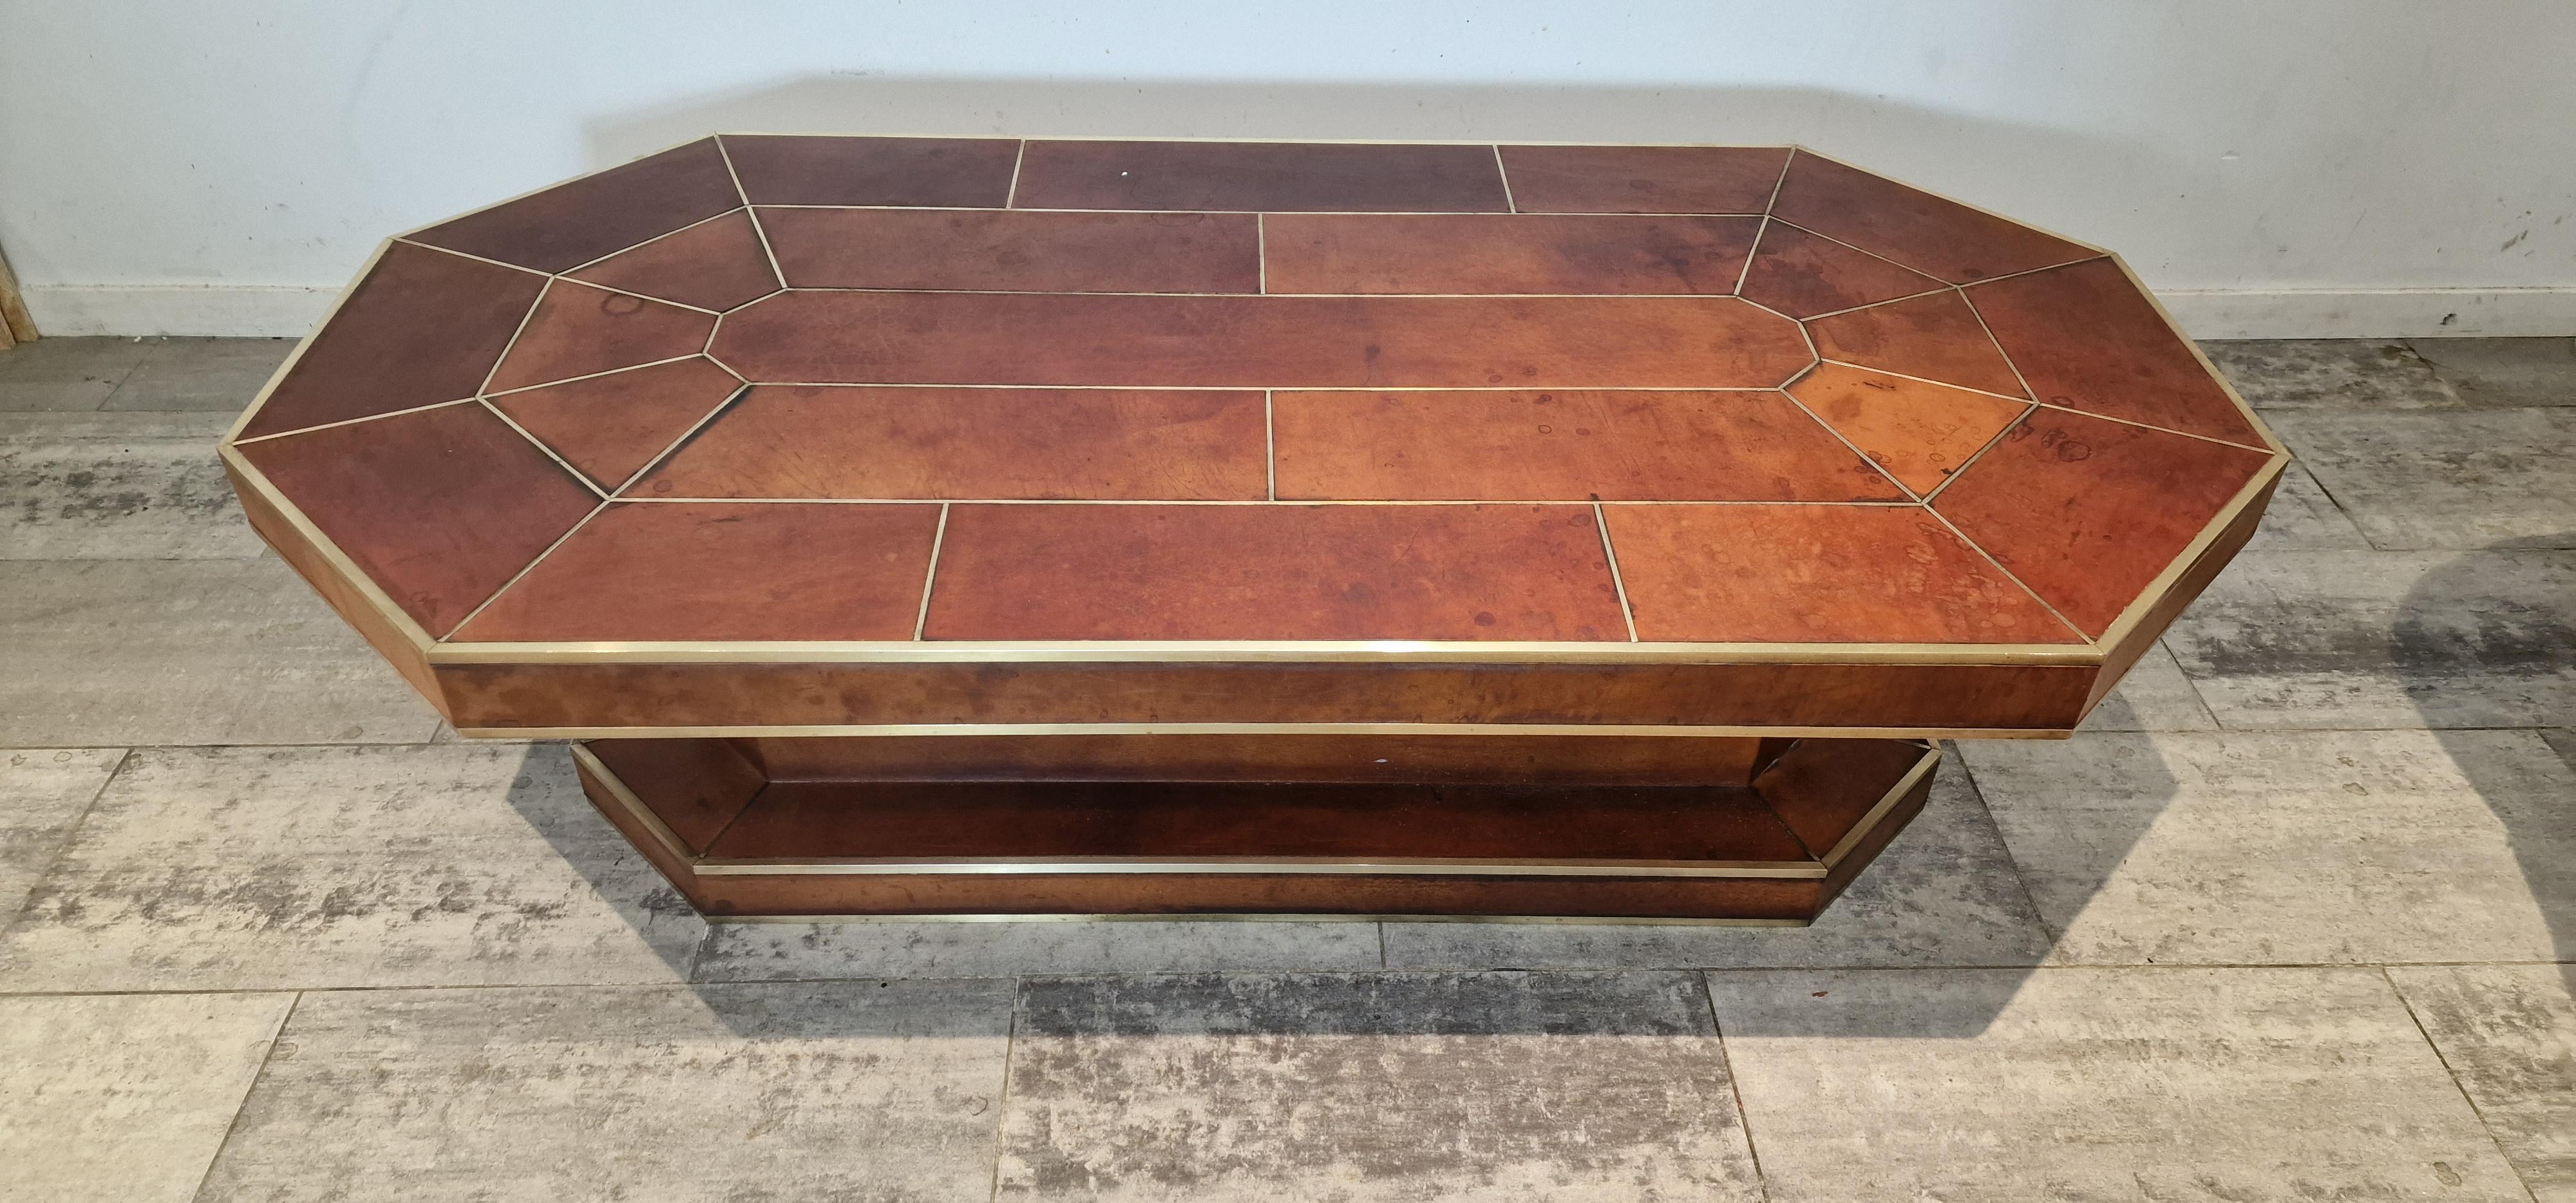 Large full leather brown coffee table with brass details from France.